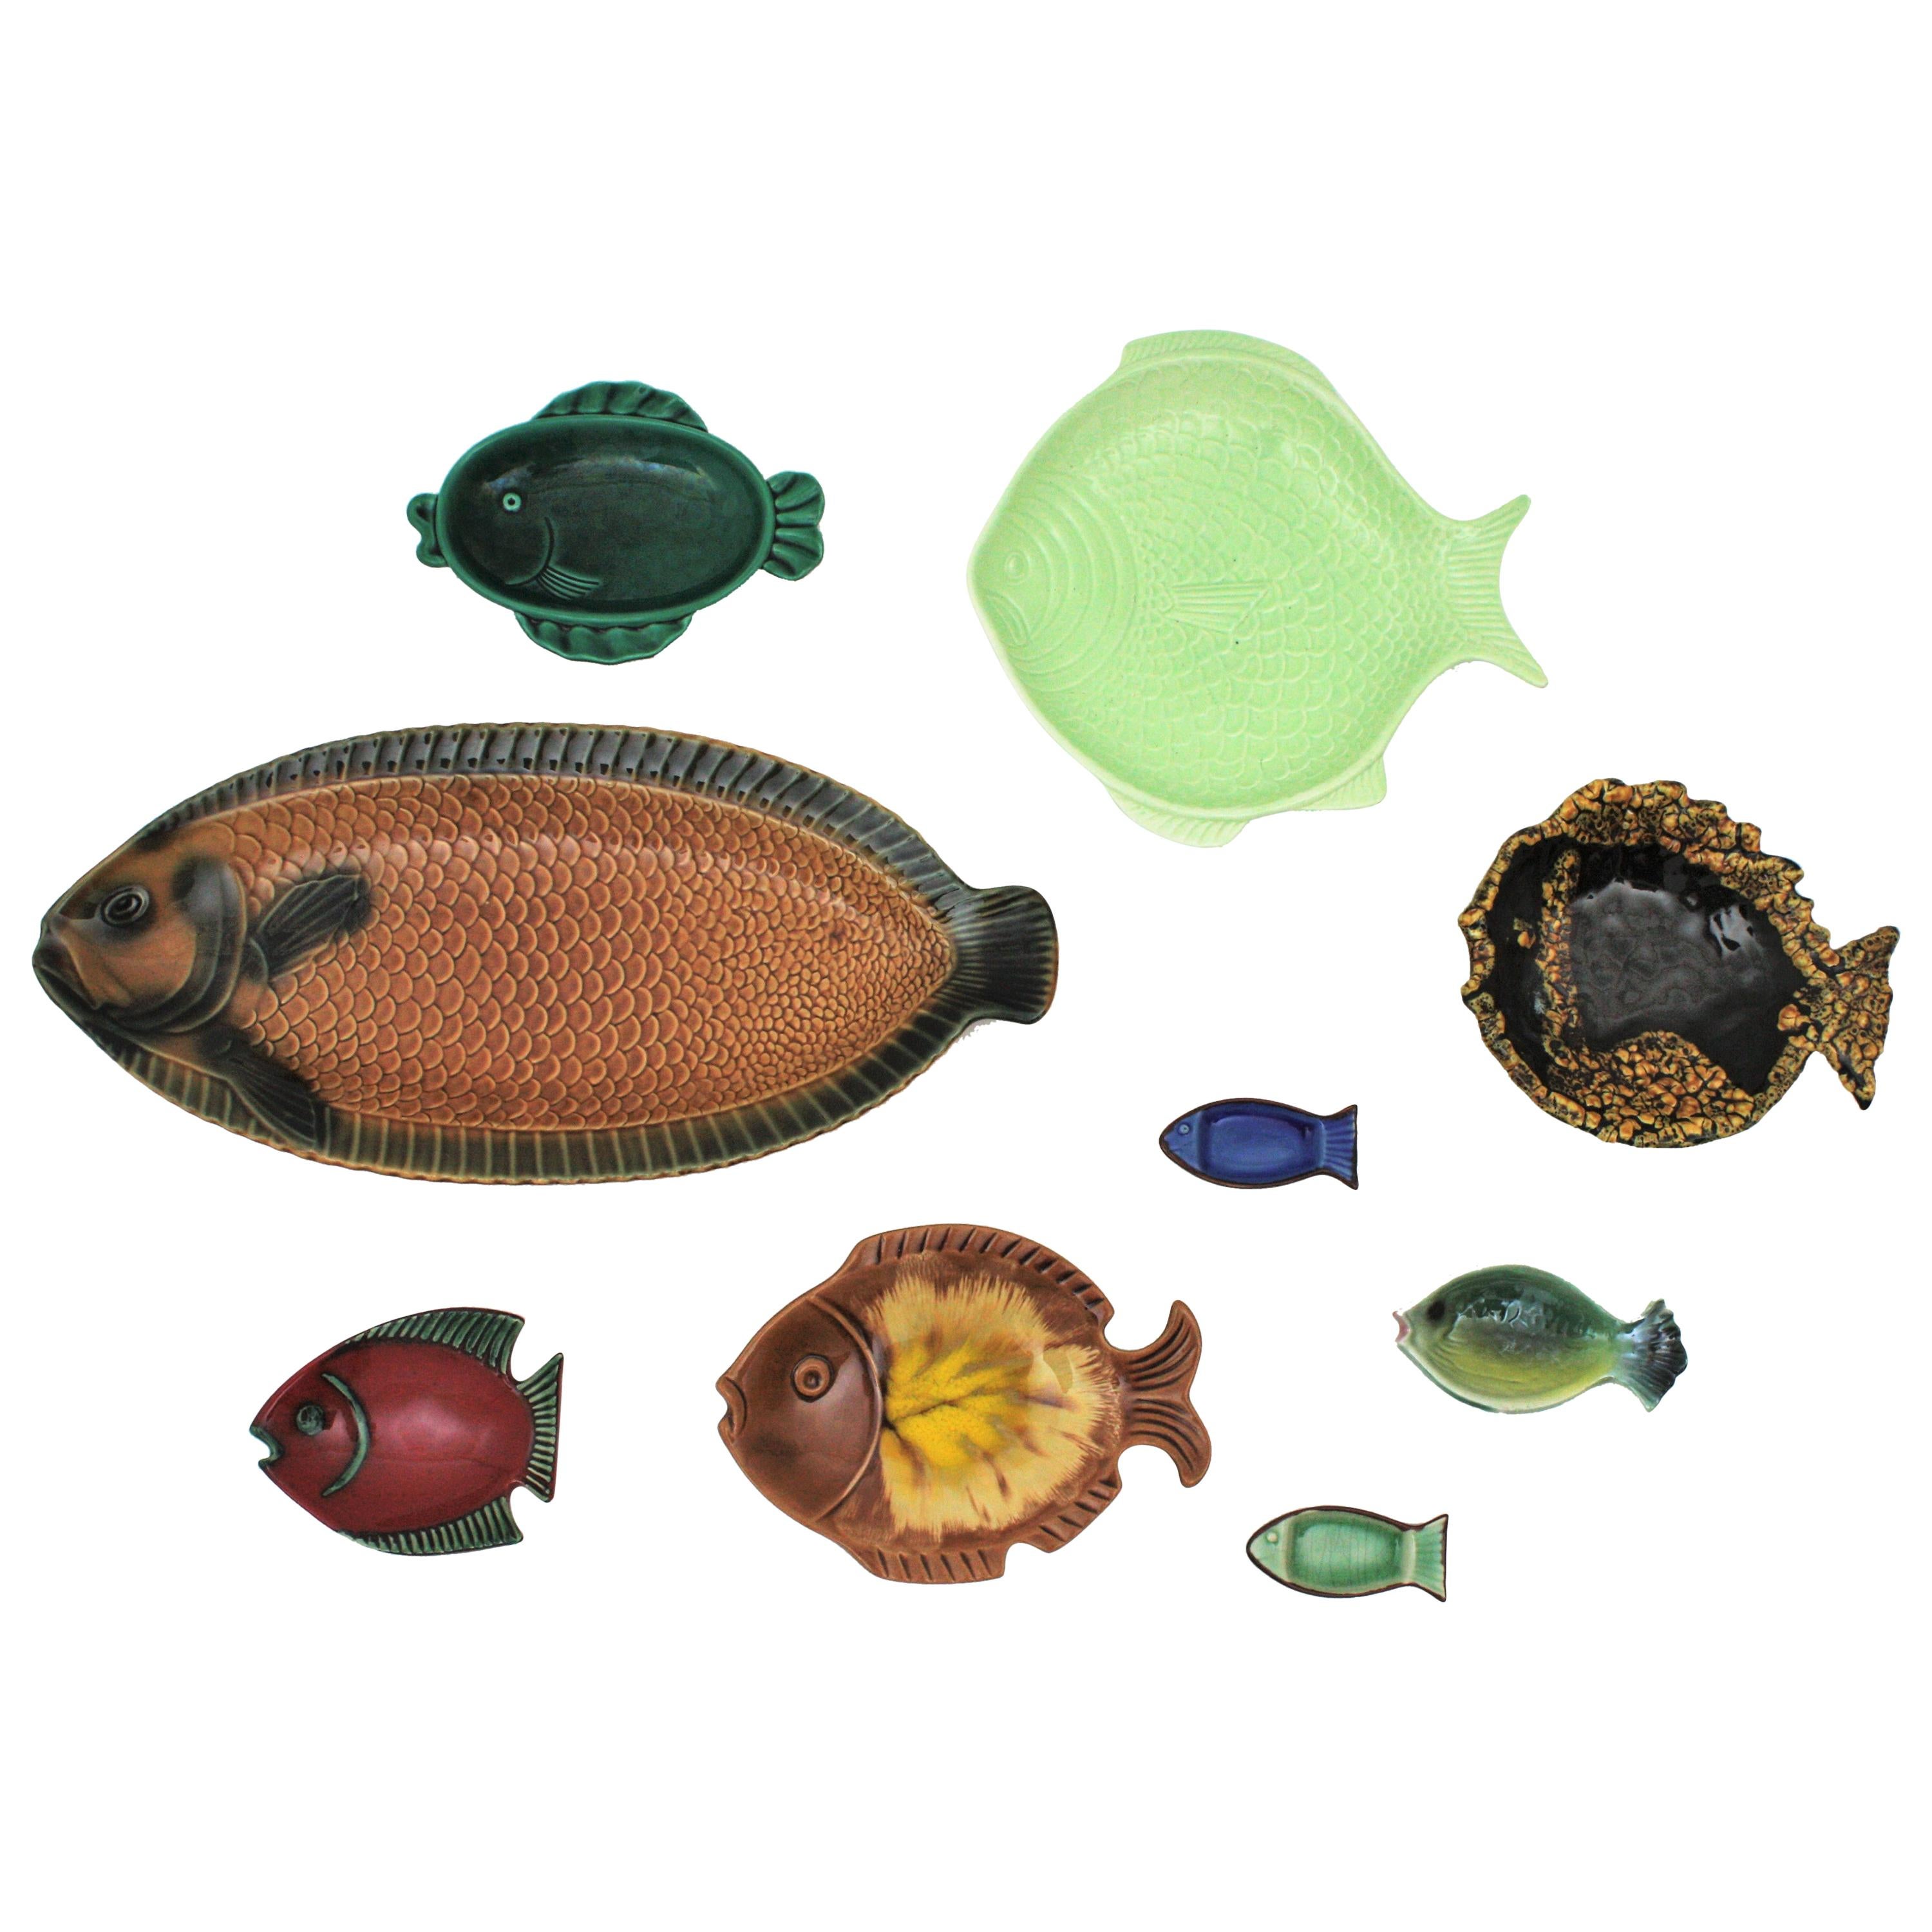 Mid-Century Modern European Majolica glazed ceramic fishes wall decoration. 1950s-1960s
The set is comprised by 9 pieces: fish platters, plates and fish wall sculptures from Italy, France, Spain, Austria and Portugal. The set is colorful with